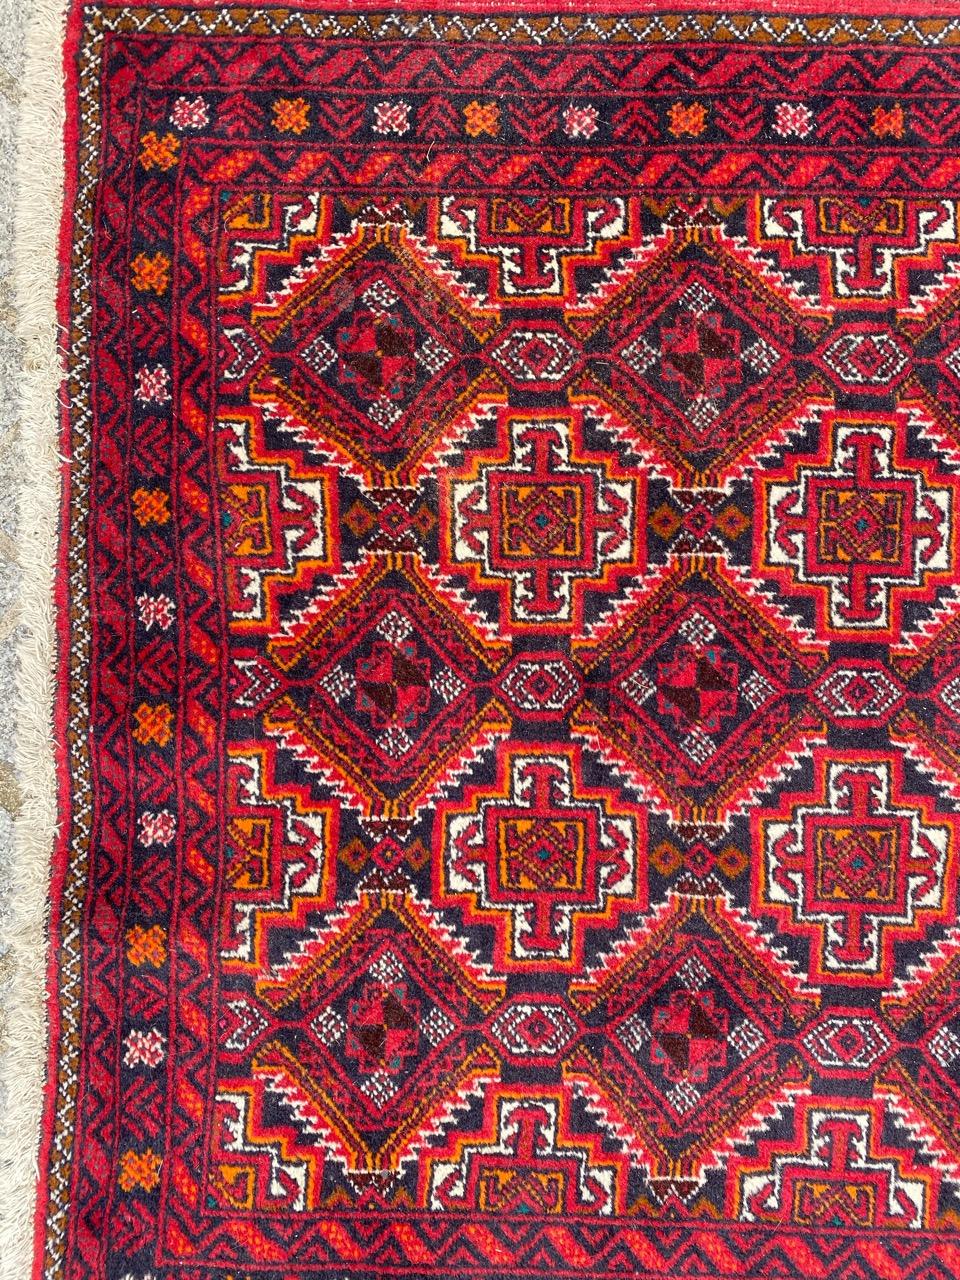 Midcentury Turkmen Afghan rug with beautiful tribal design and nice colors, entirely hand knotted with wool velvet on cotton foundation.

✨✨✨
